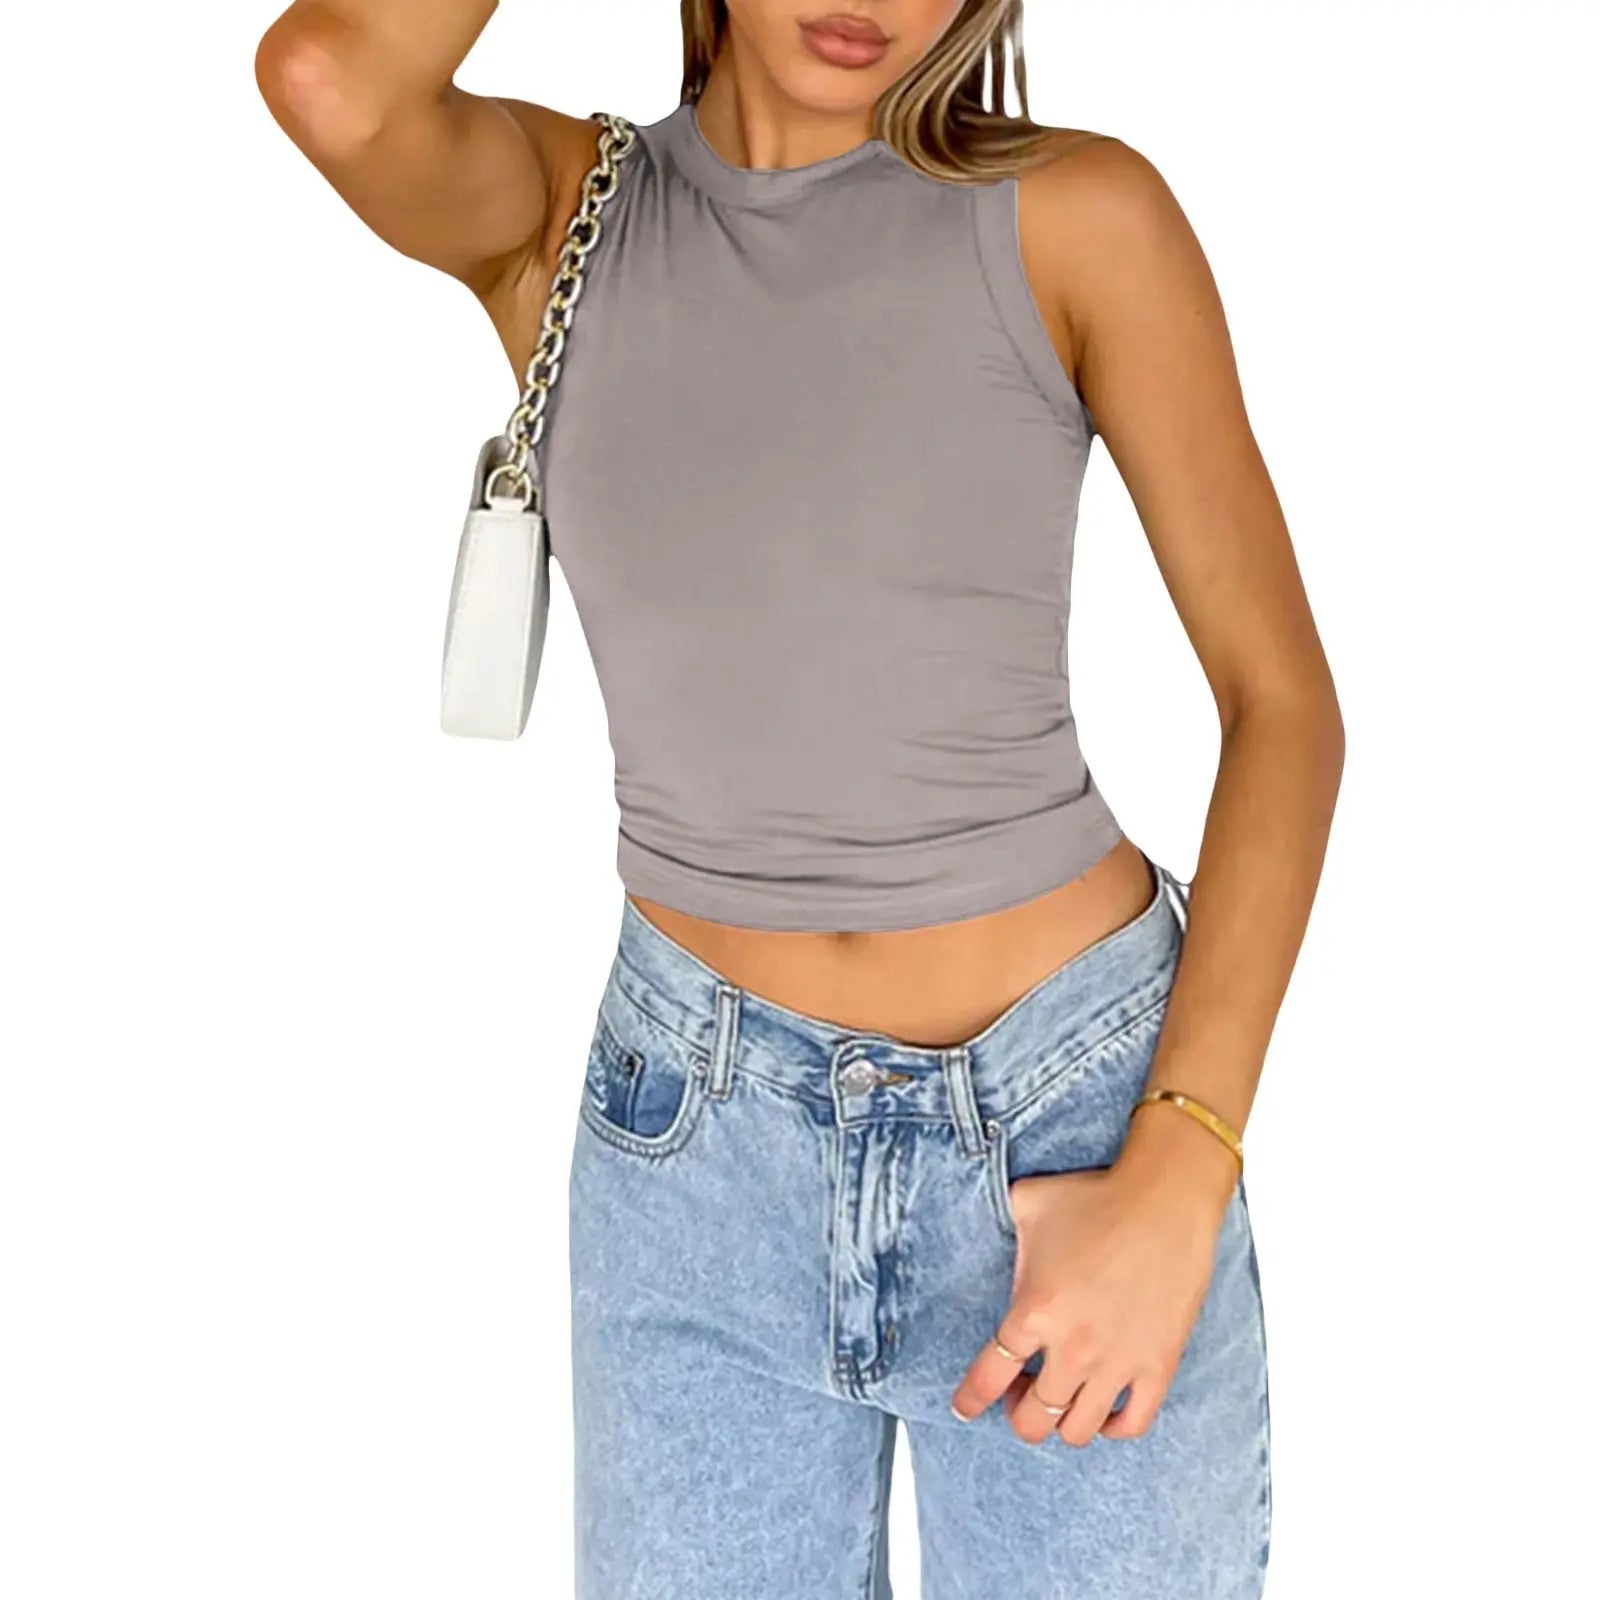 Strechy Sleeveless Cropped Tee - Clementine Lea's boutique